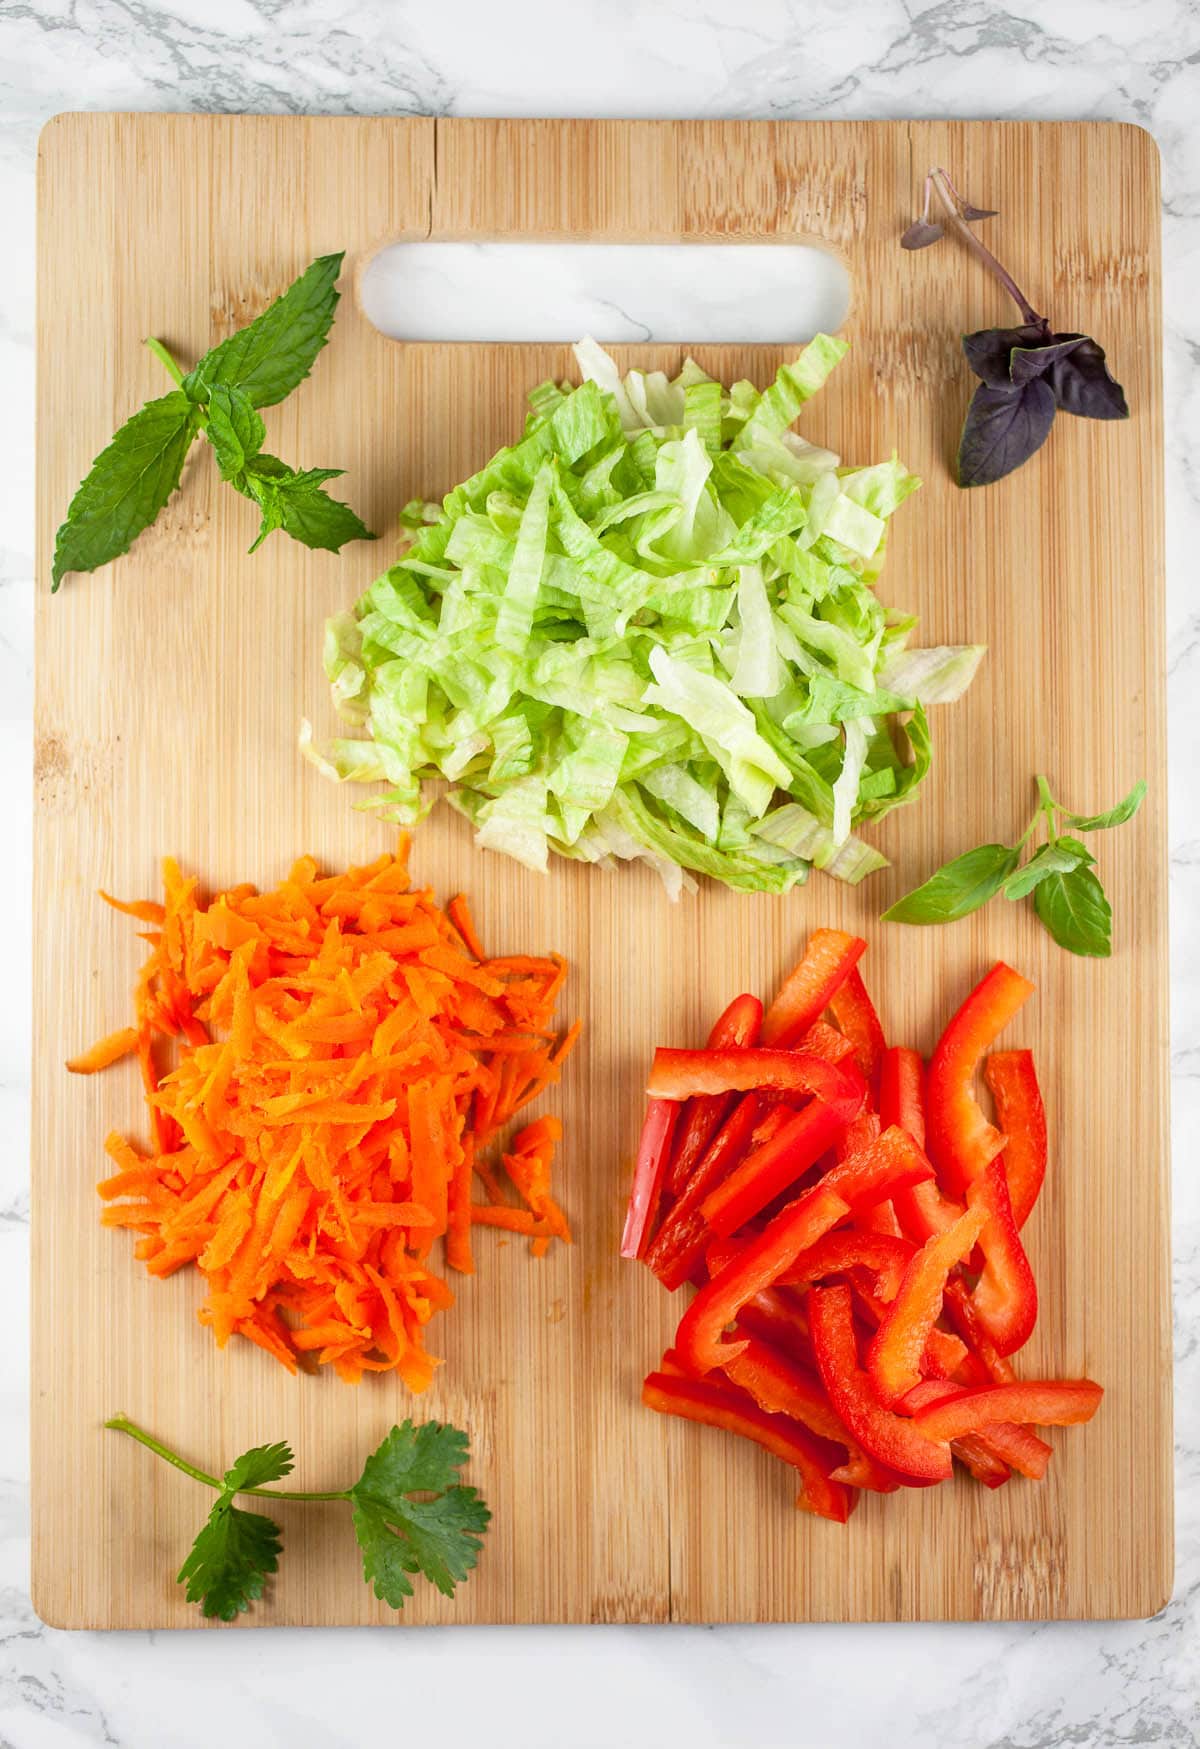 Shredded carrots, lettuce, red bell pepper, cilantro, basil, and mint on wooden cutting board.